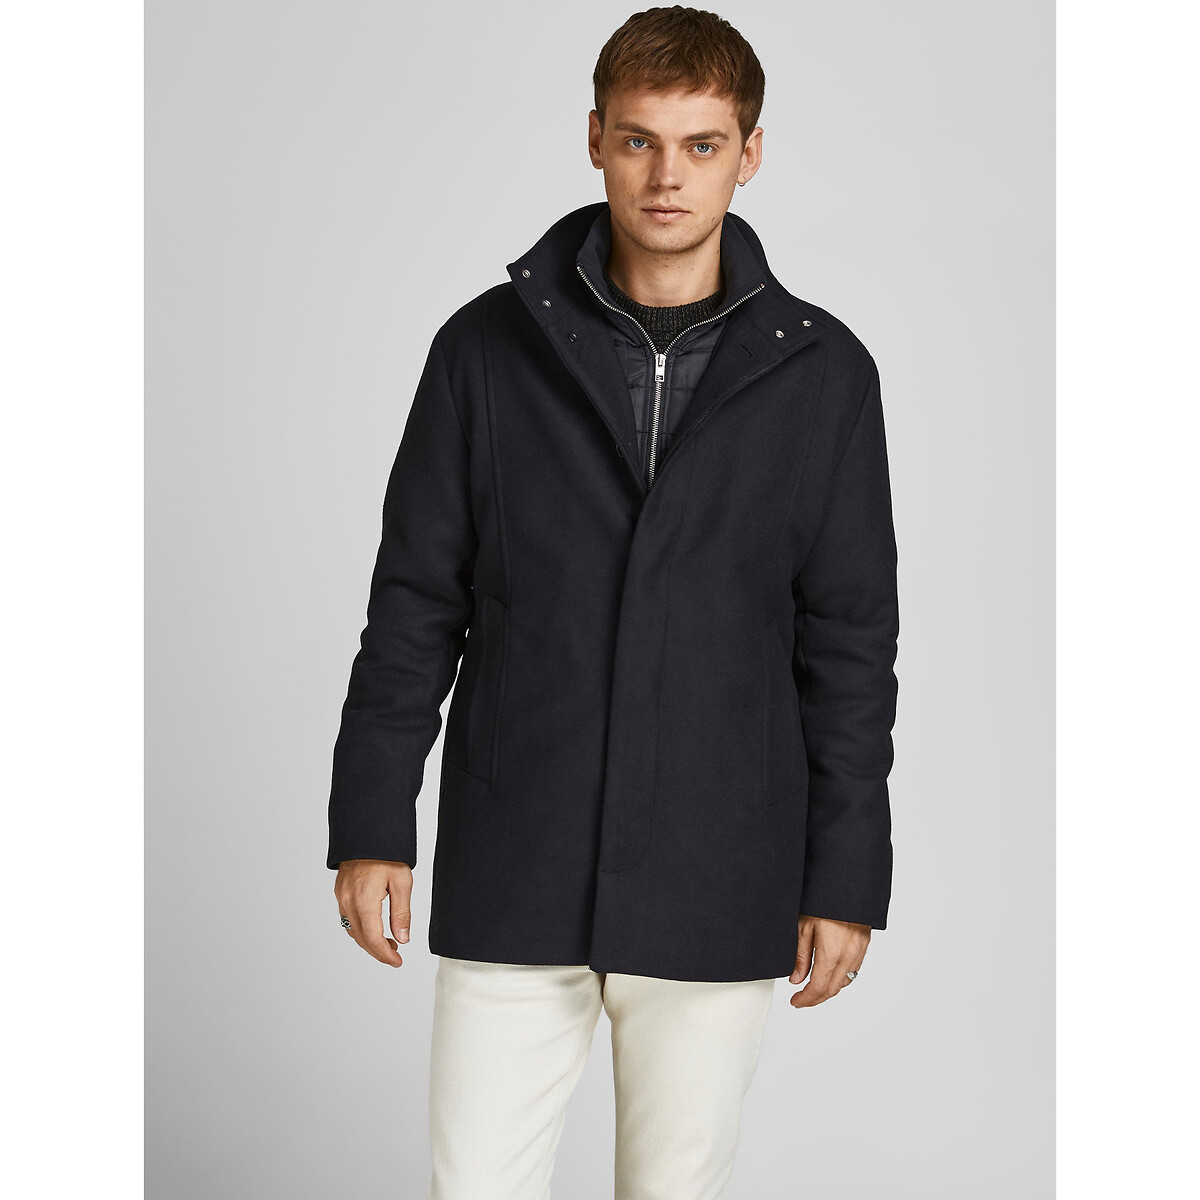 Image of Dunham Warm Jacket with High Neck